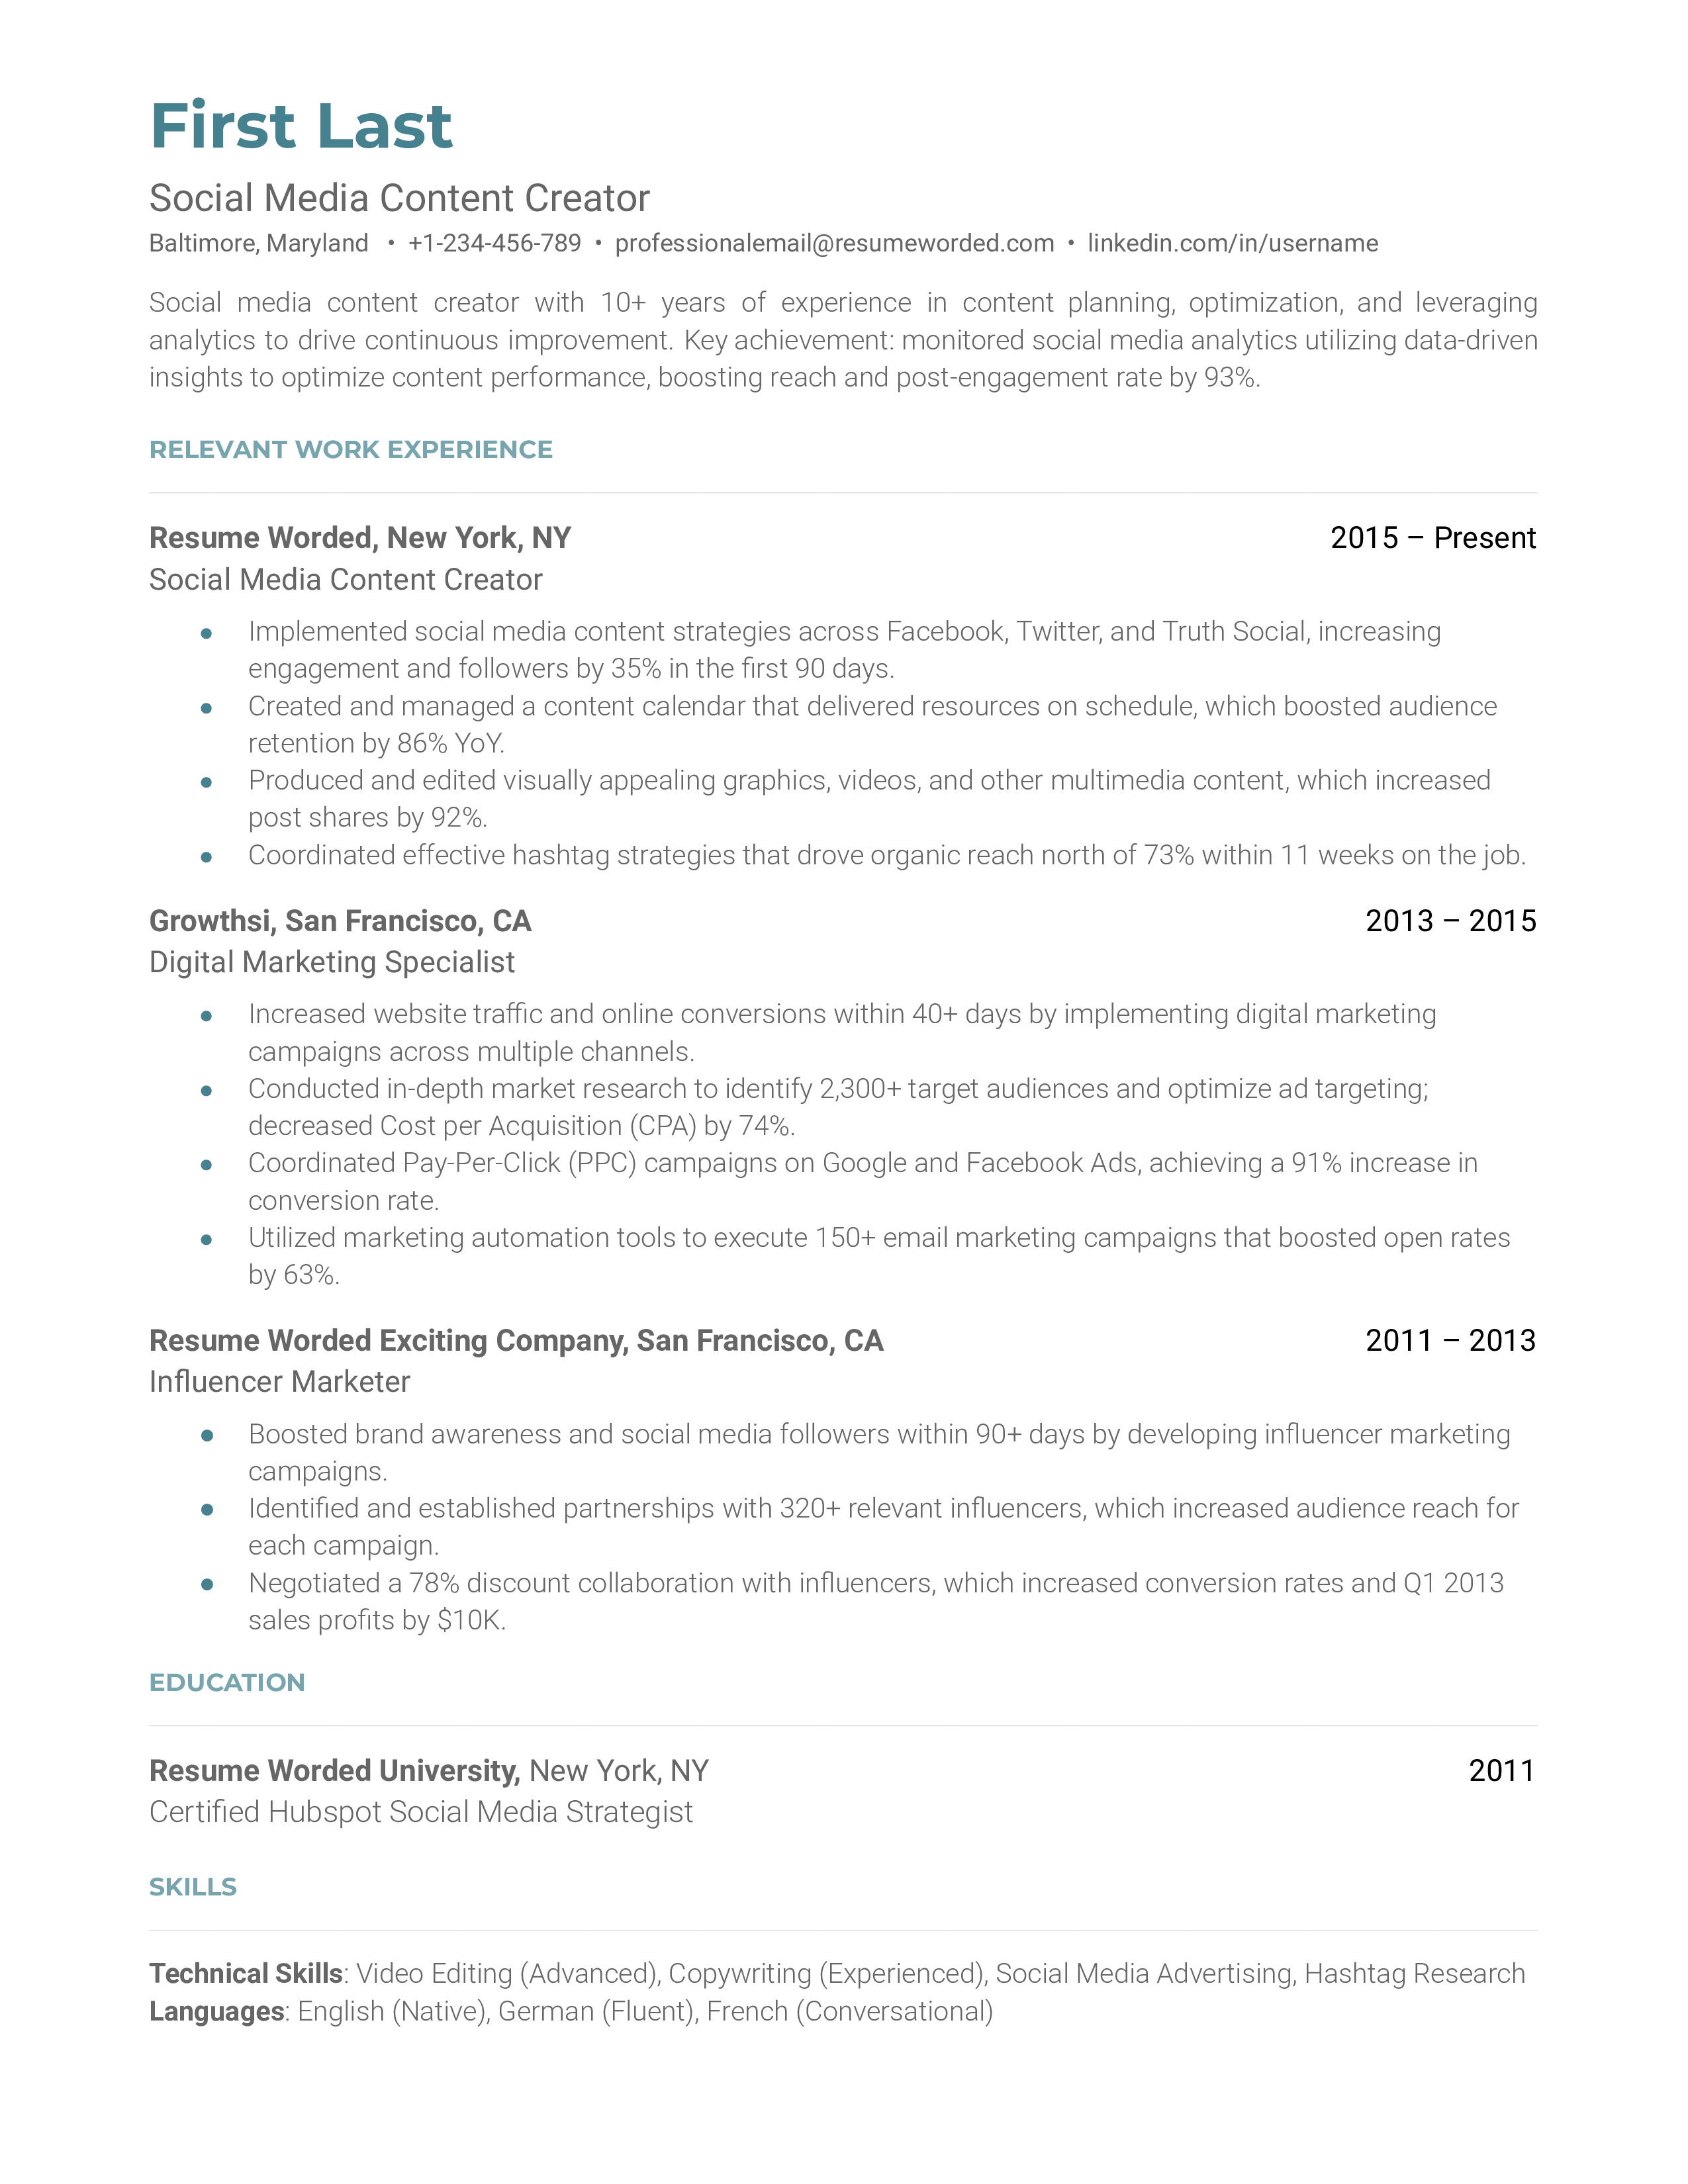 Screenshot of an engaging resume for a Social Media Content Creator.